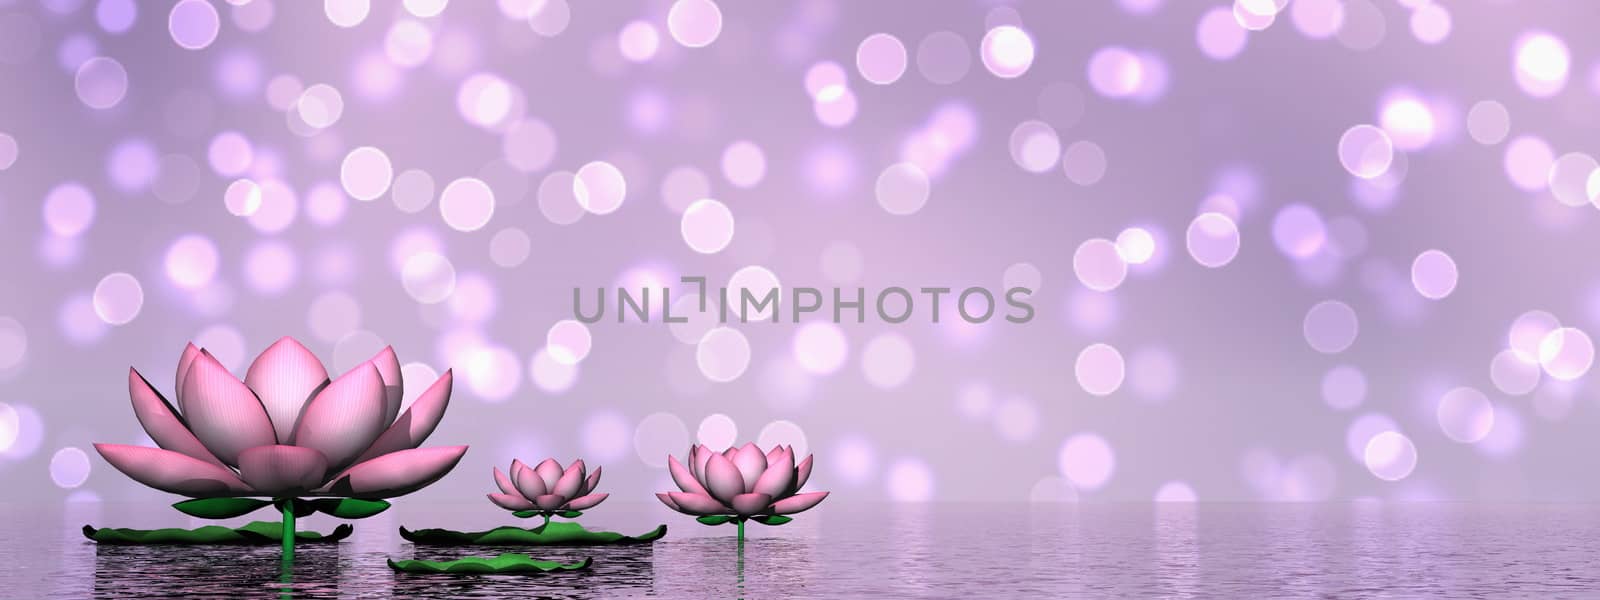 Lily flowers and leaves upon water in violet bokeh background - 3D render